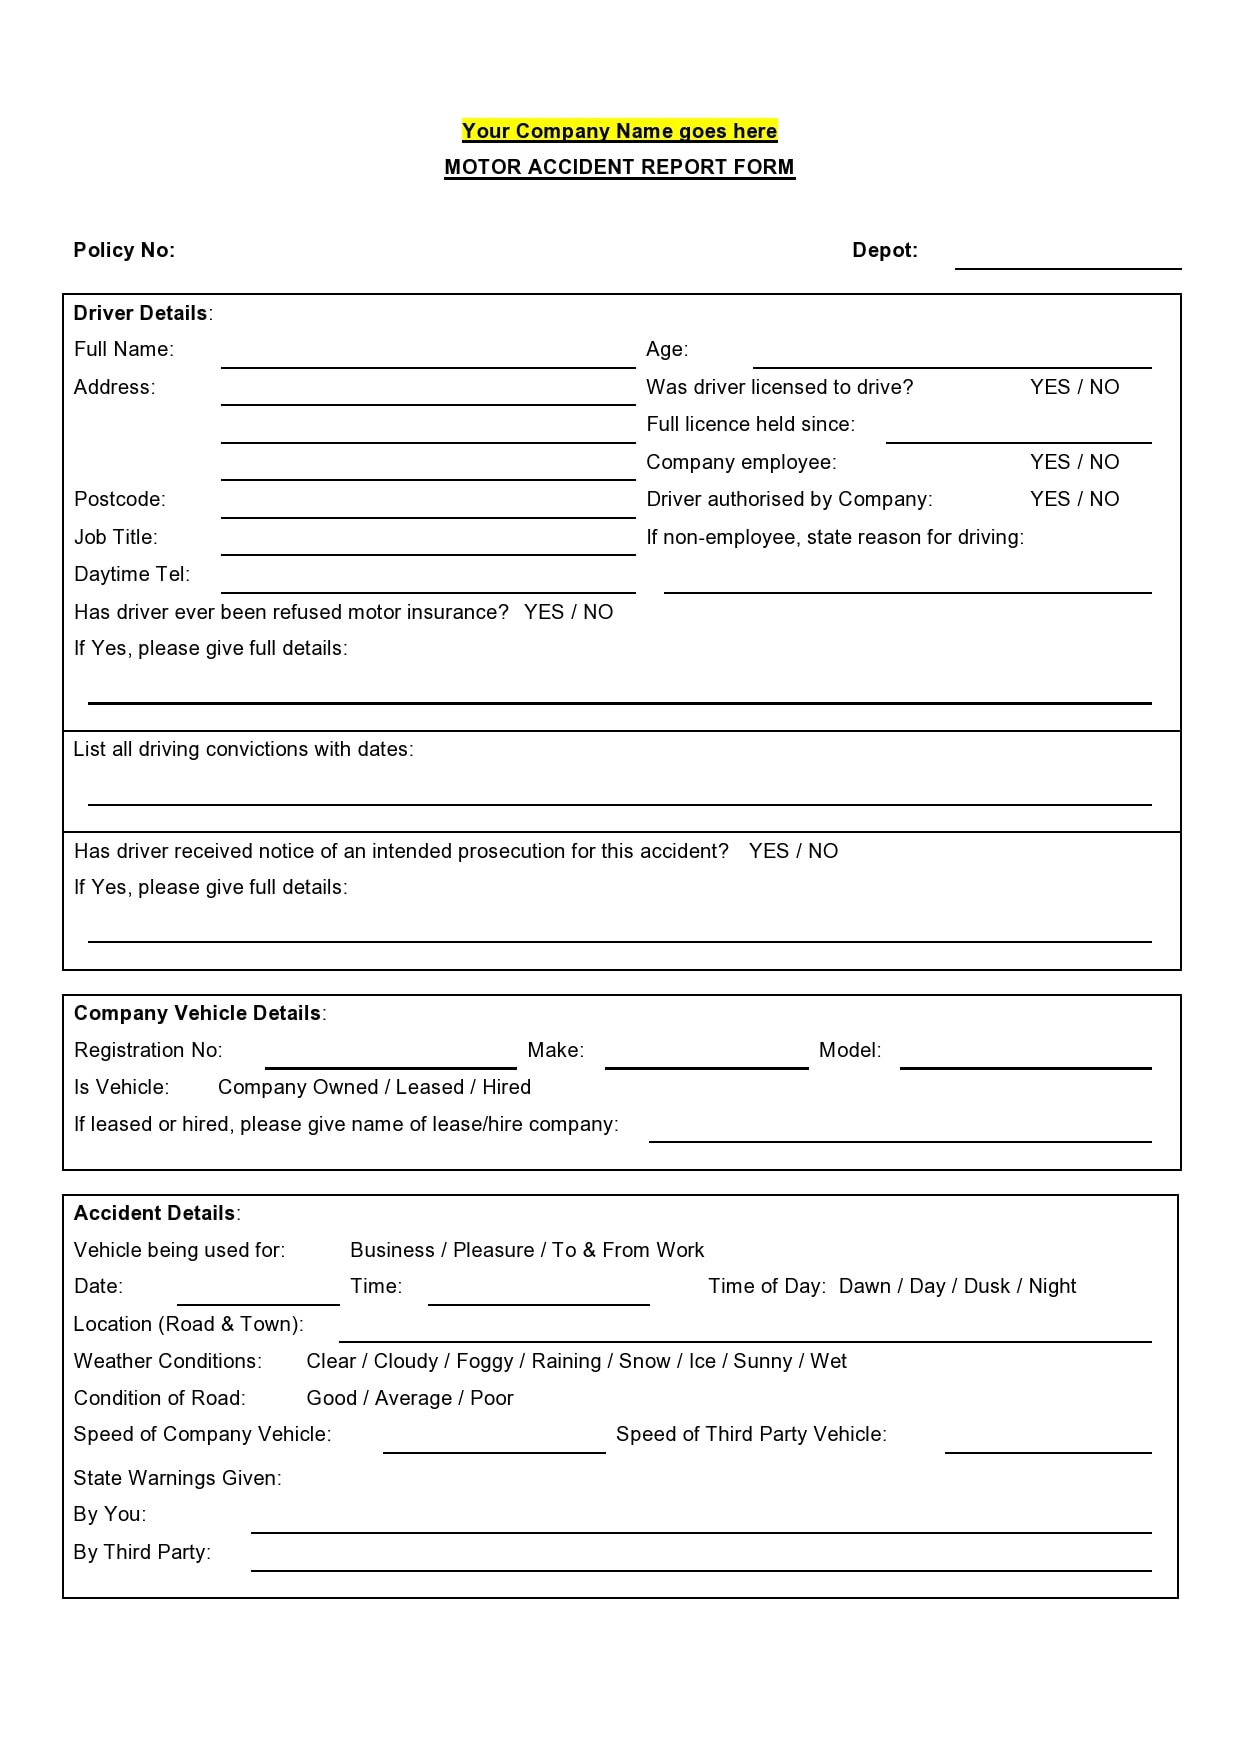 10 Accident Report Forms (Car, Work Injury, more) - TemplateArchive Pertaining To Motor Vehicle Accident Report Form Template